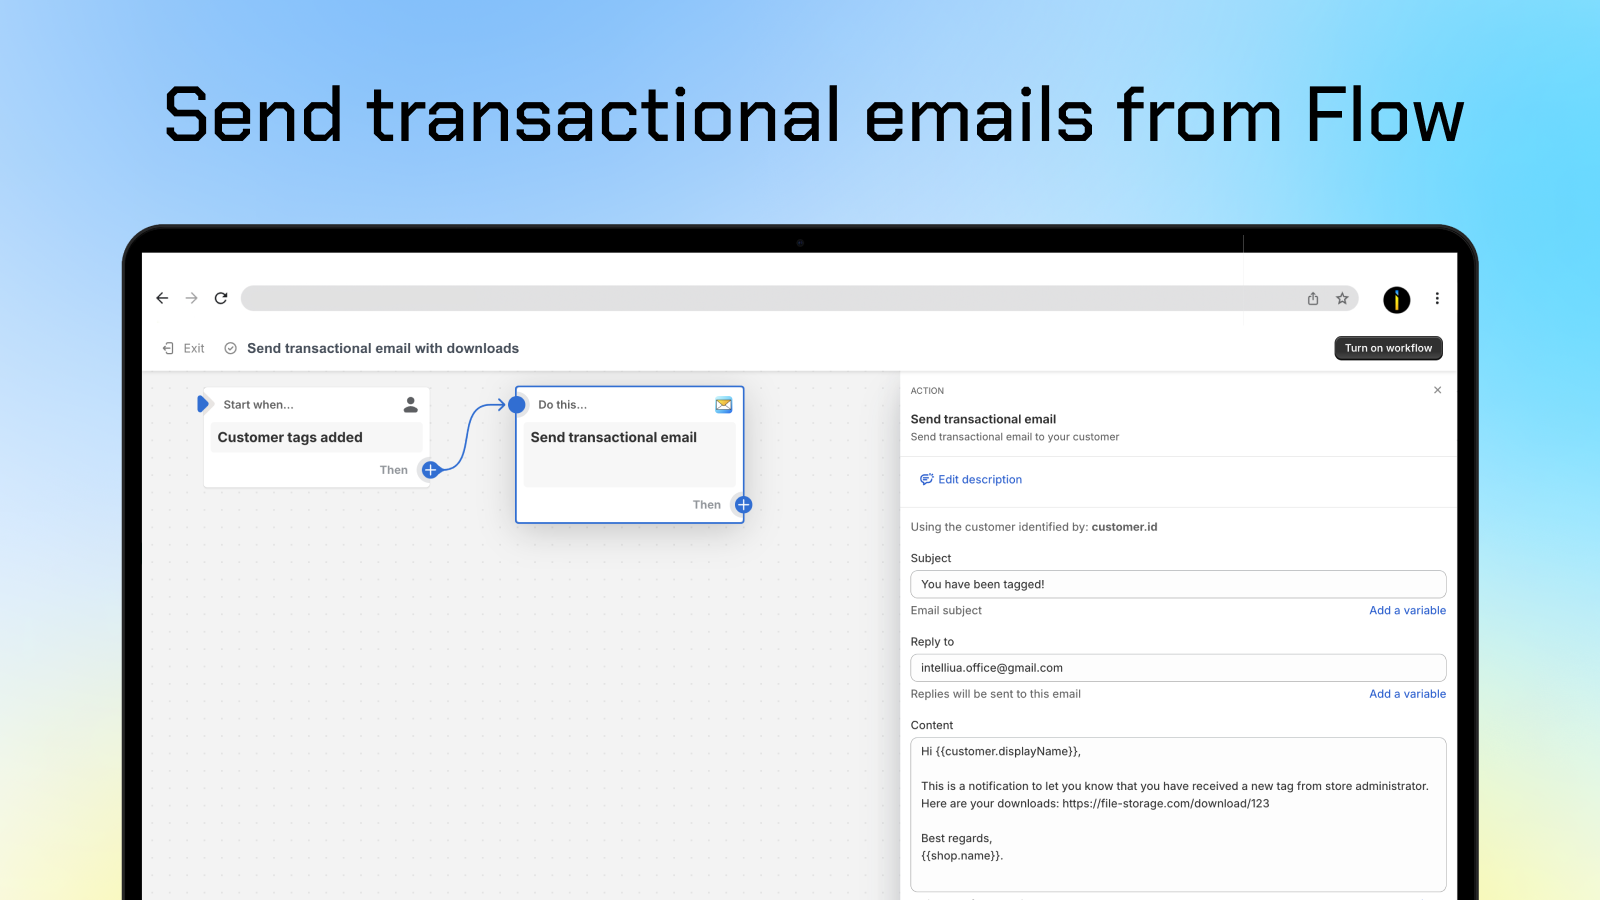 FlowMail – send transactional emails from Shopify Flow